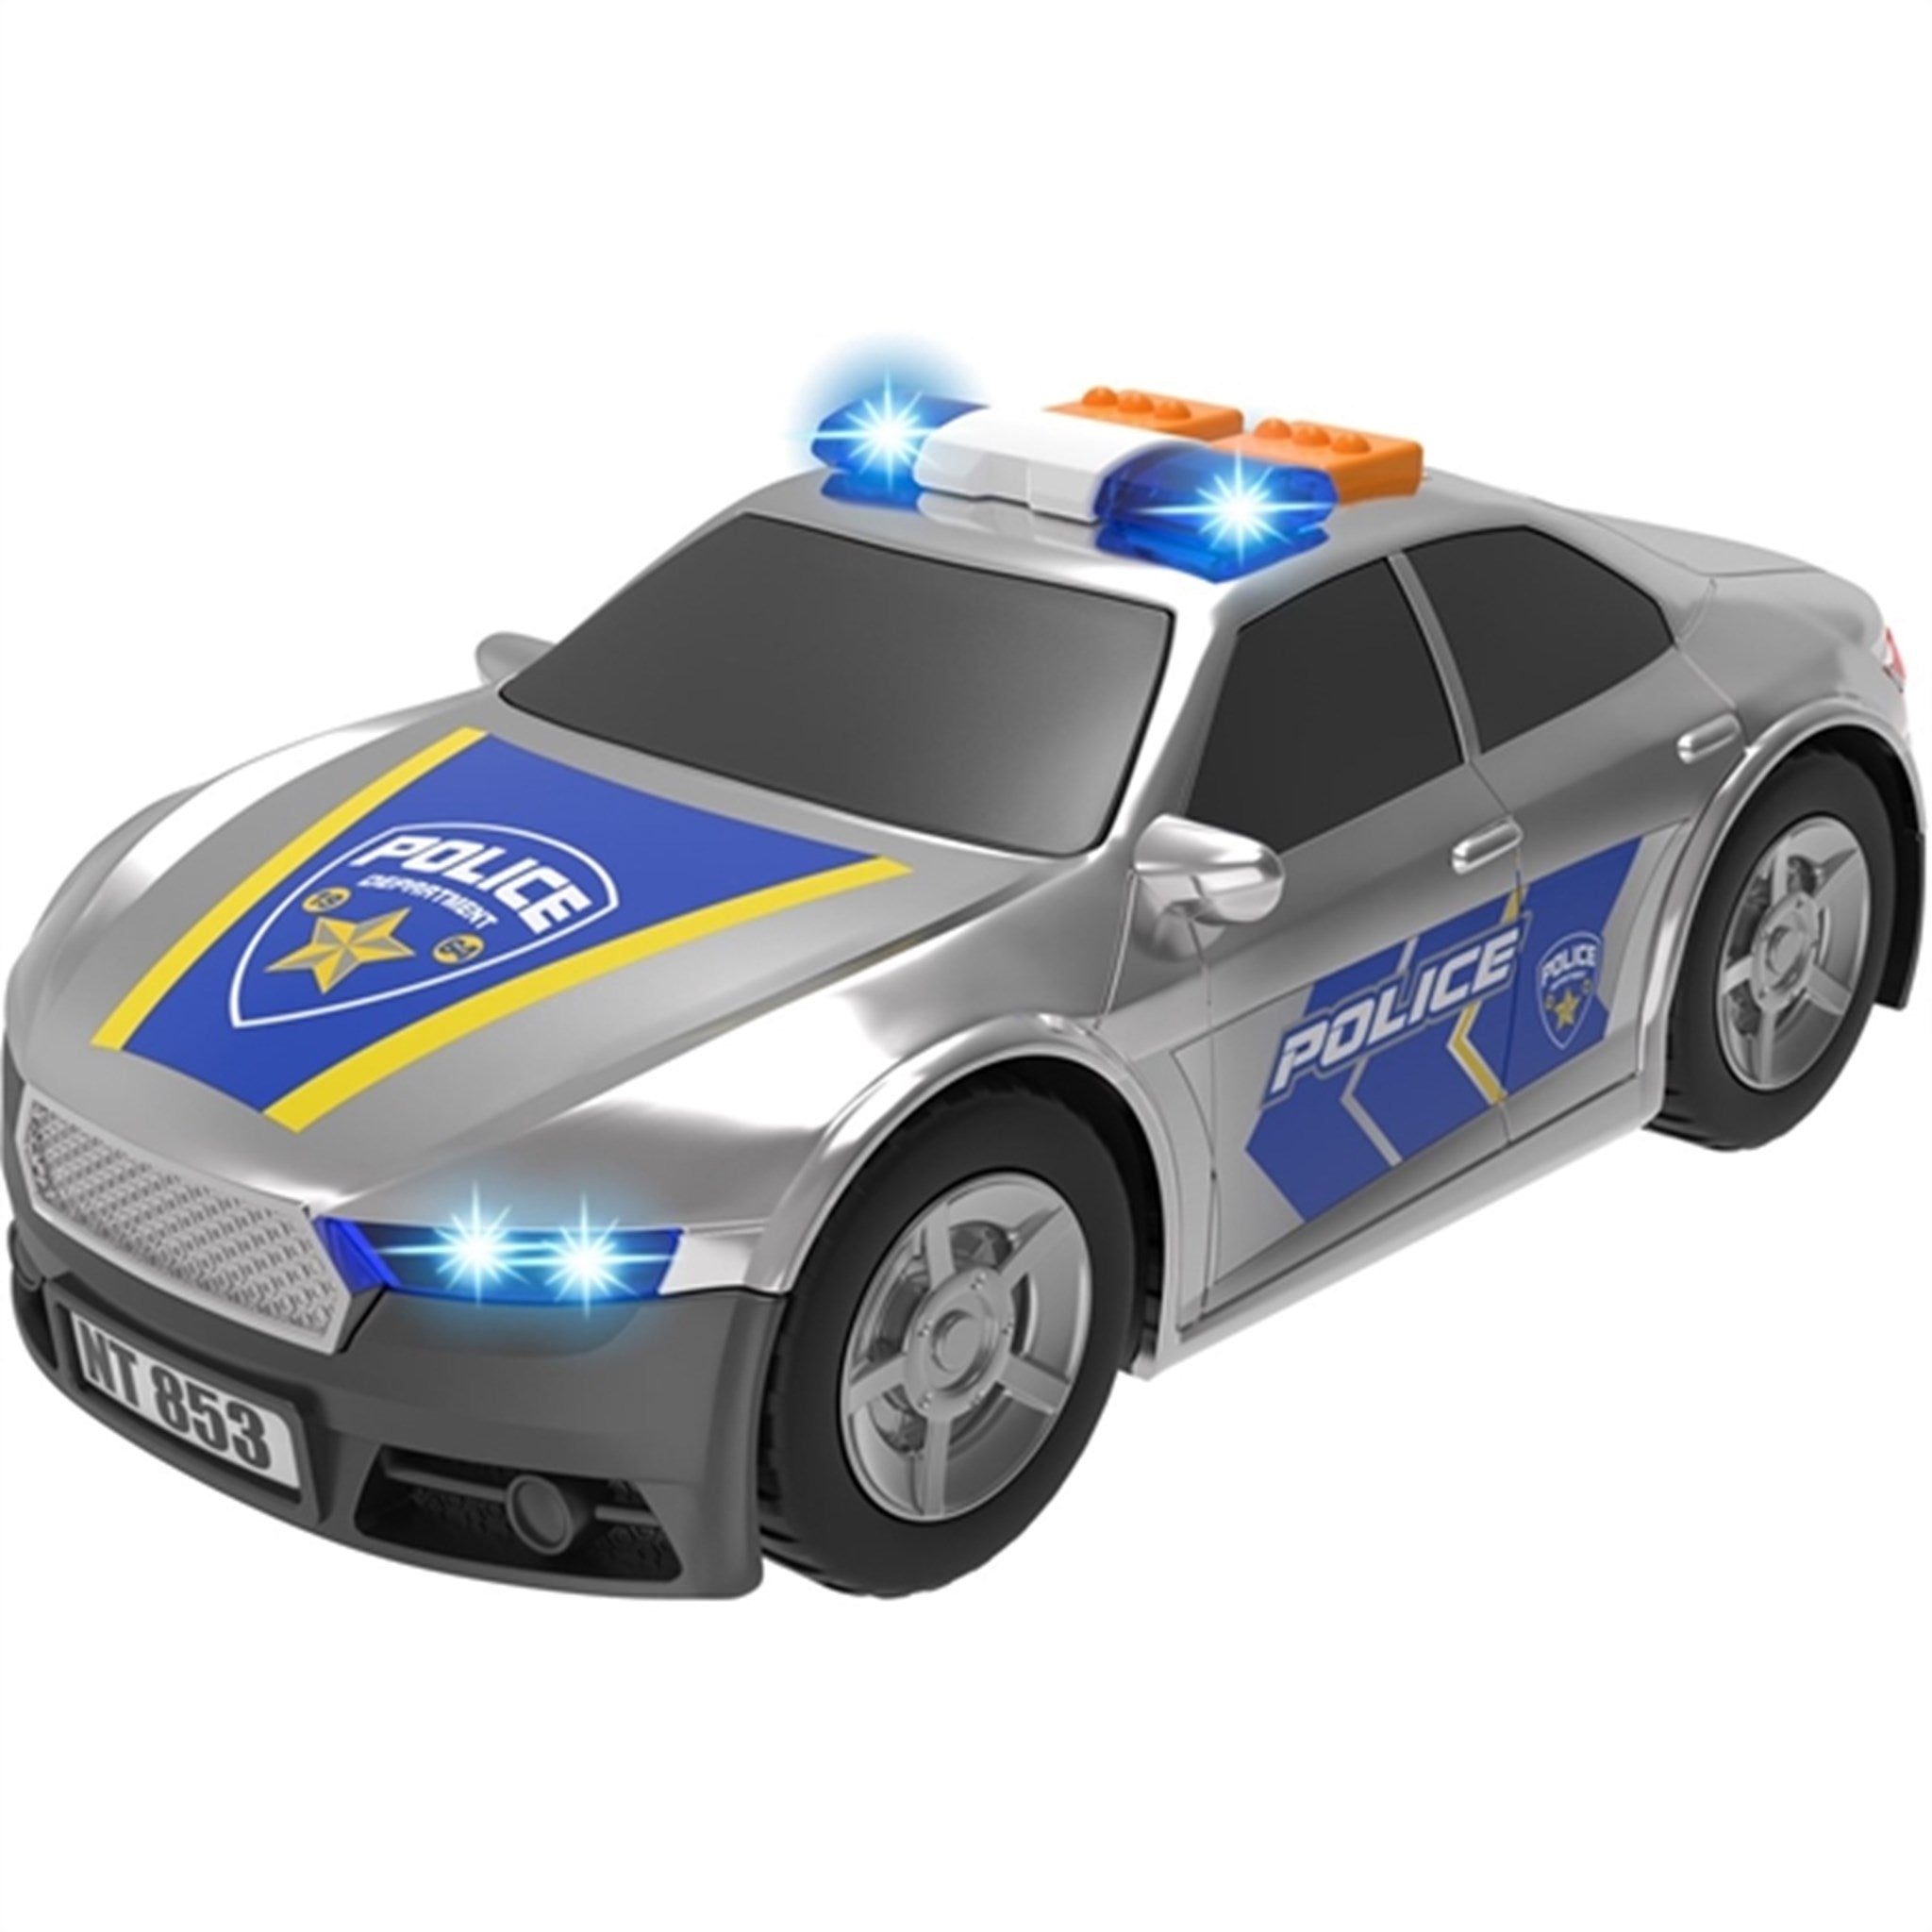 Teamsterz Small L&S Police Car